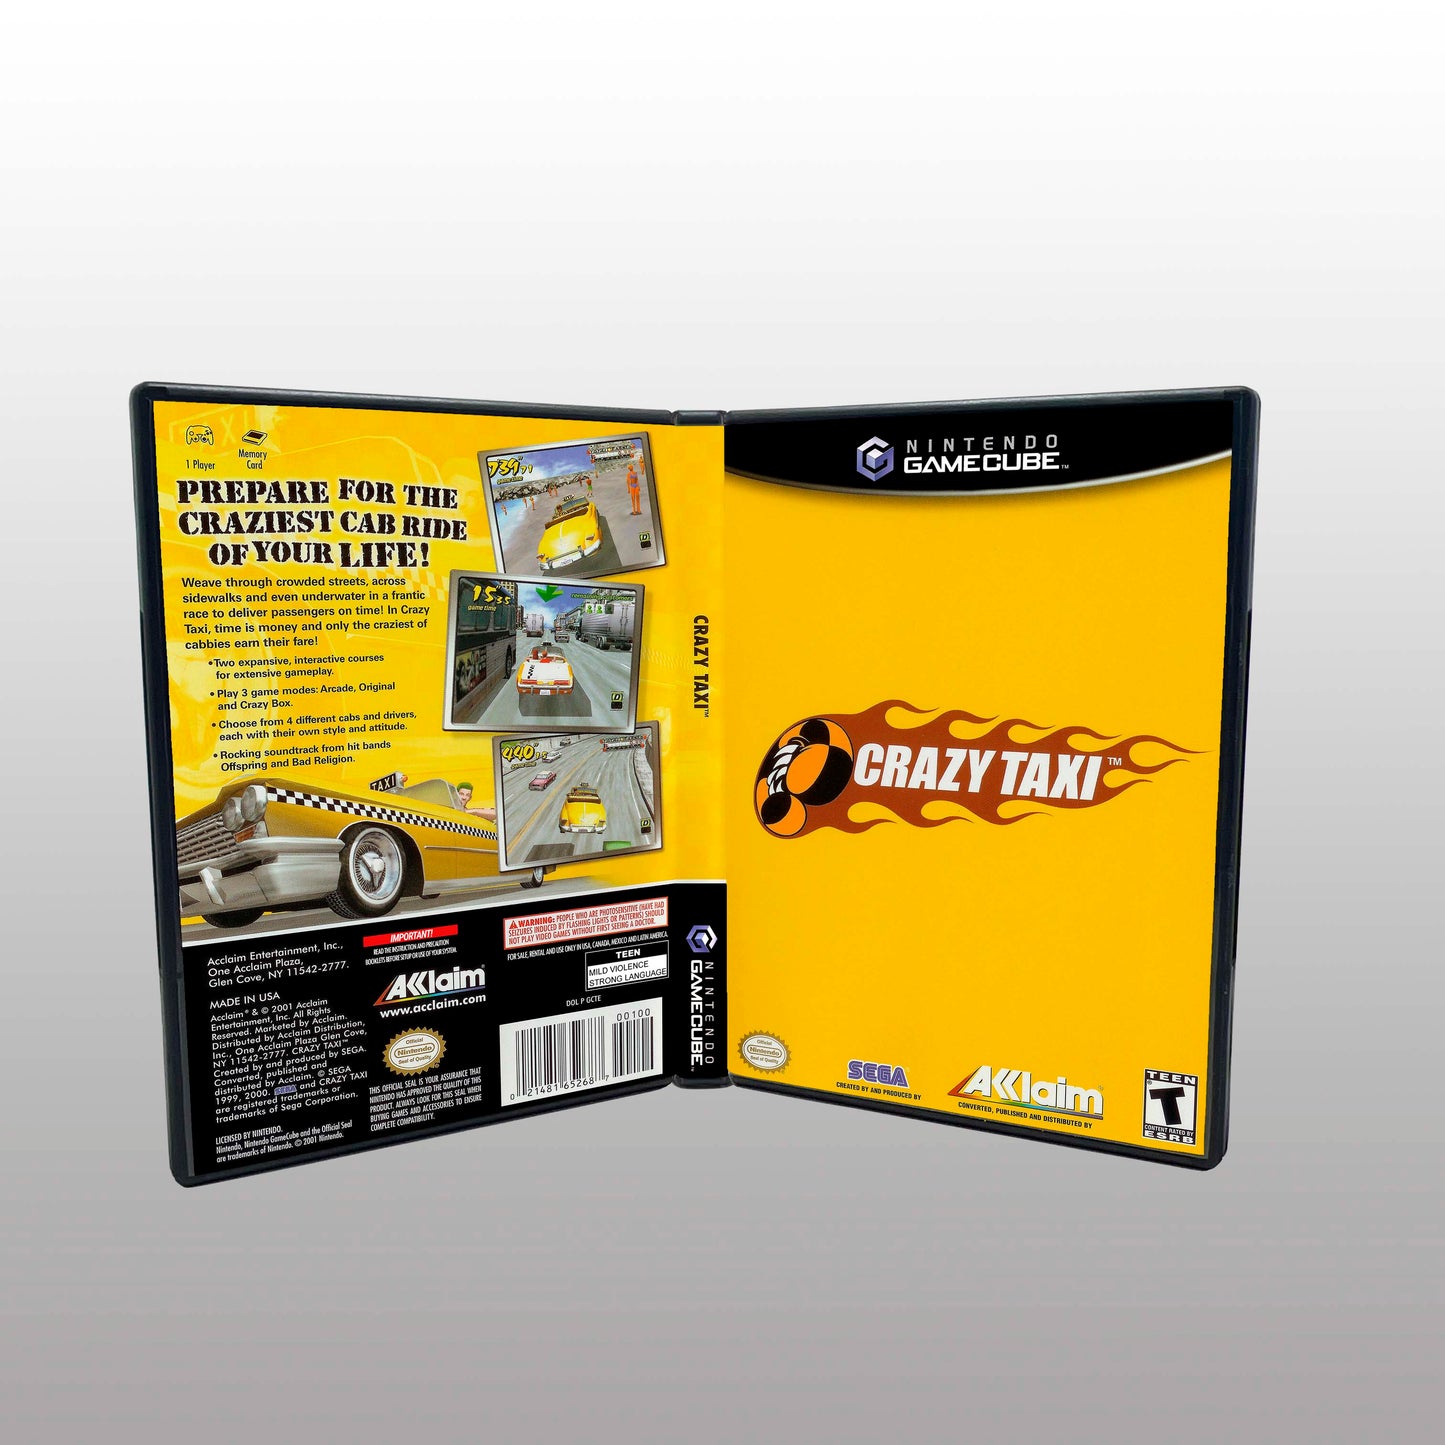 GameCube Replacement Case - NO GAME - Crazy Taxi